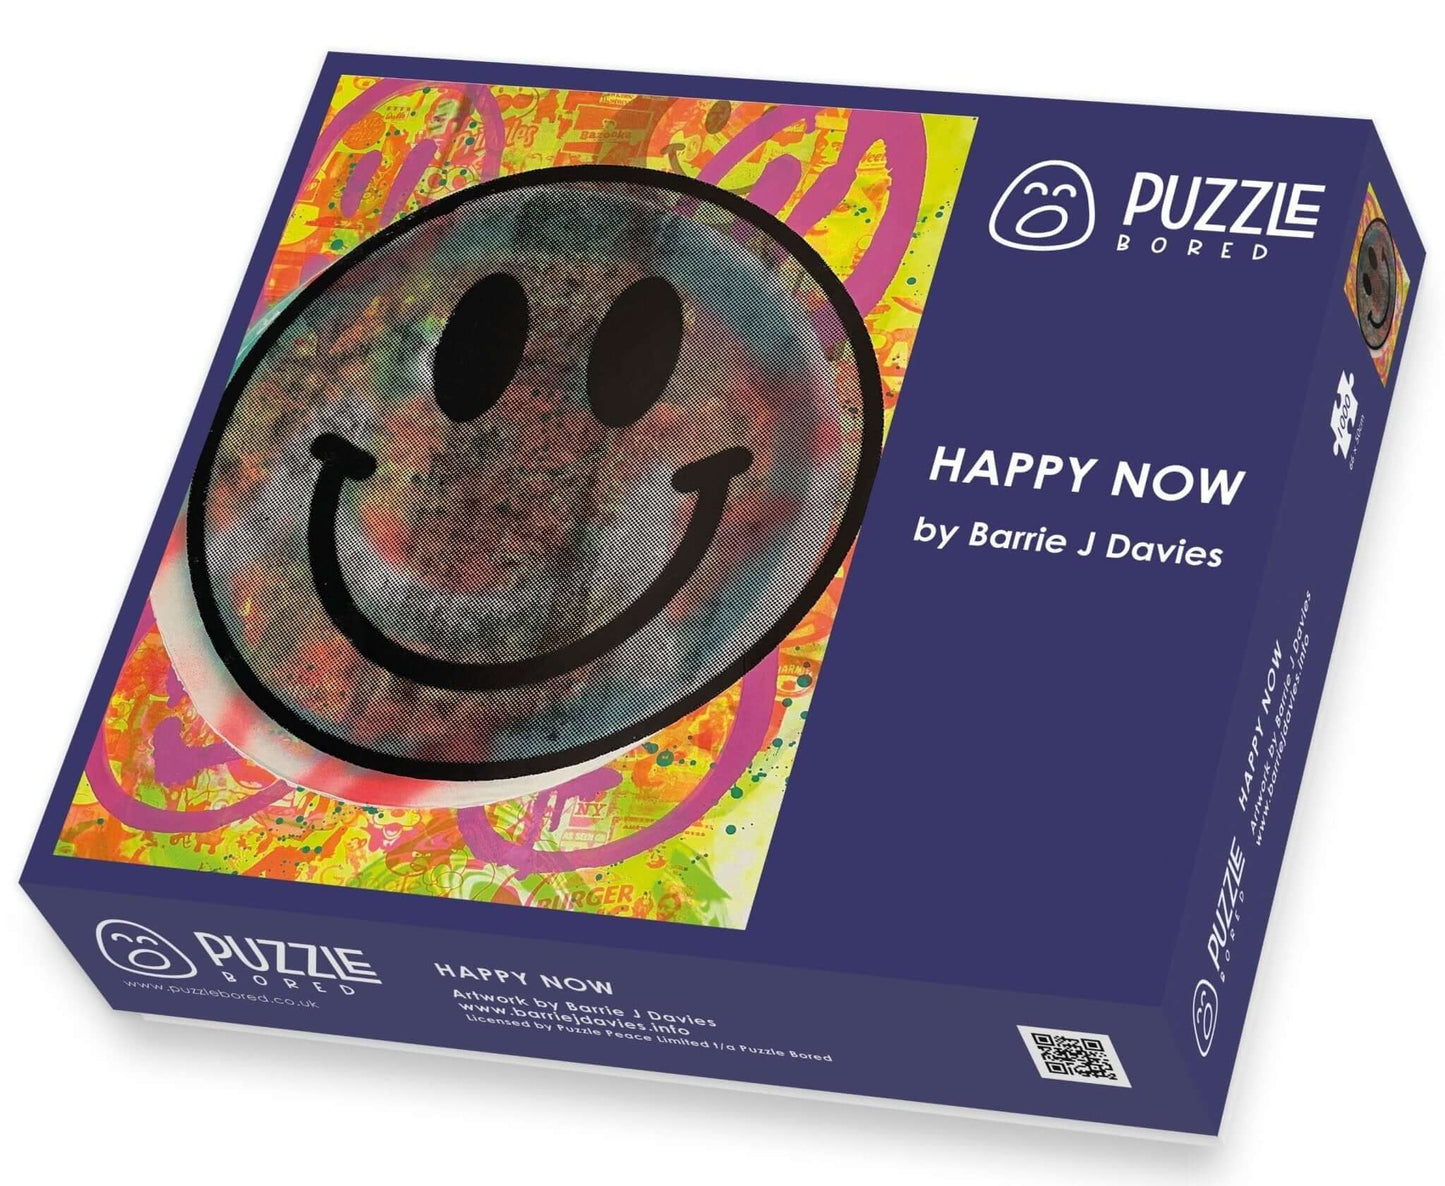 Happy Now by Barrie J Davies - Puzzle Bored